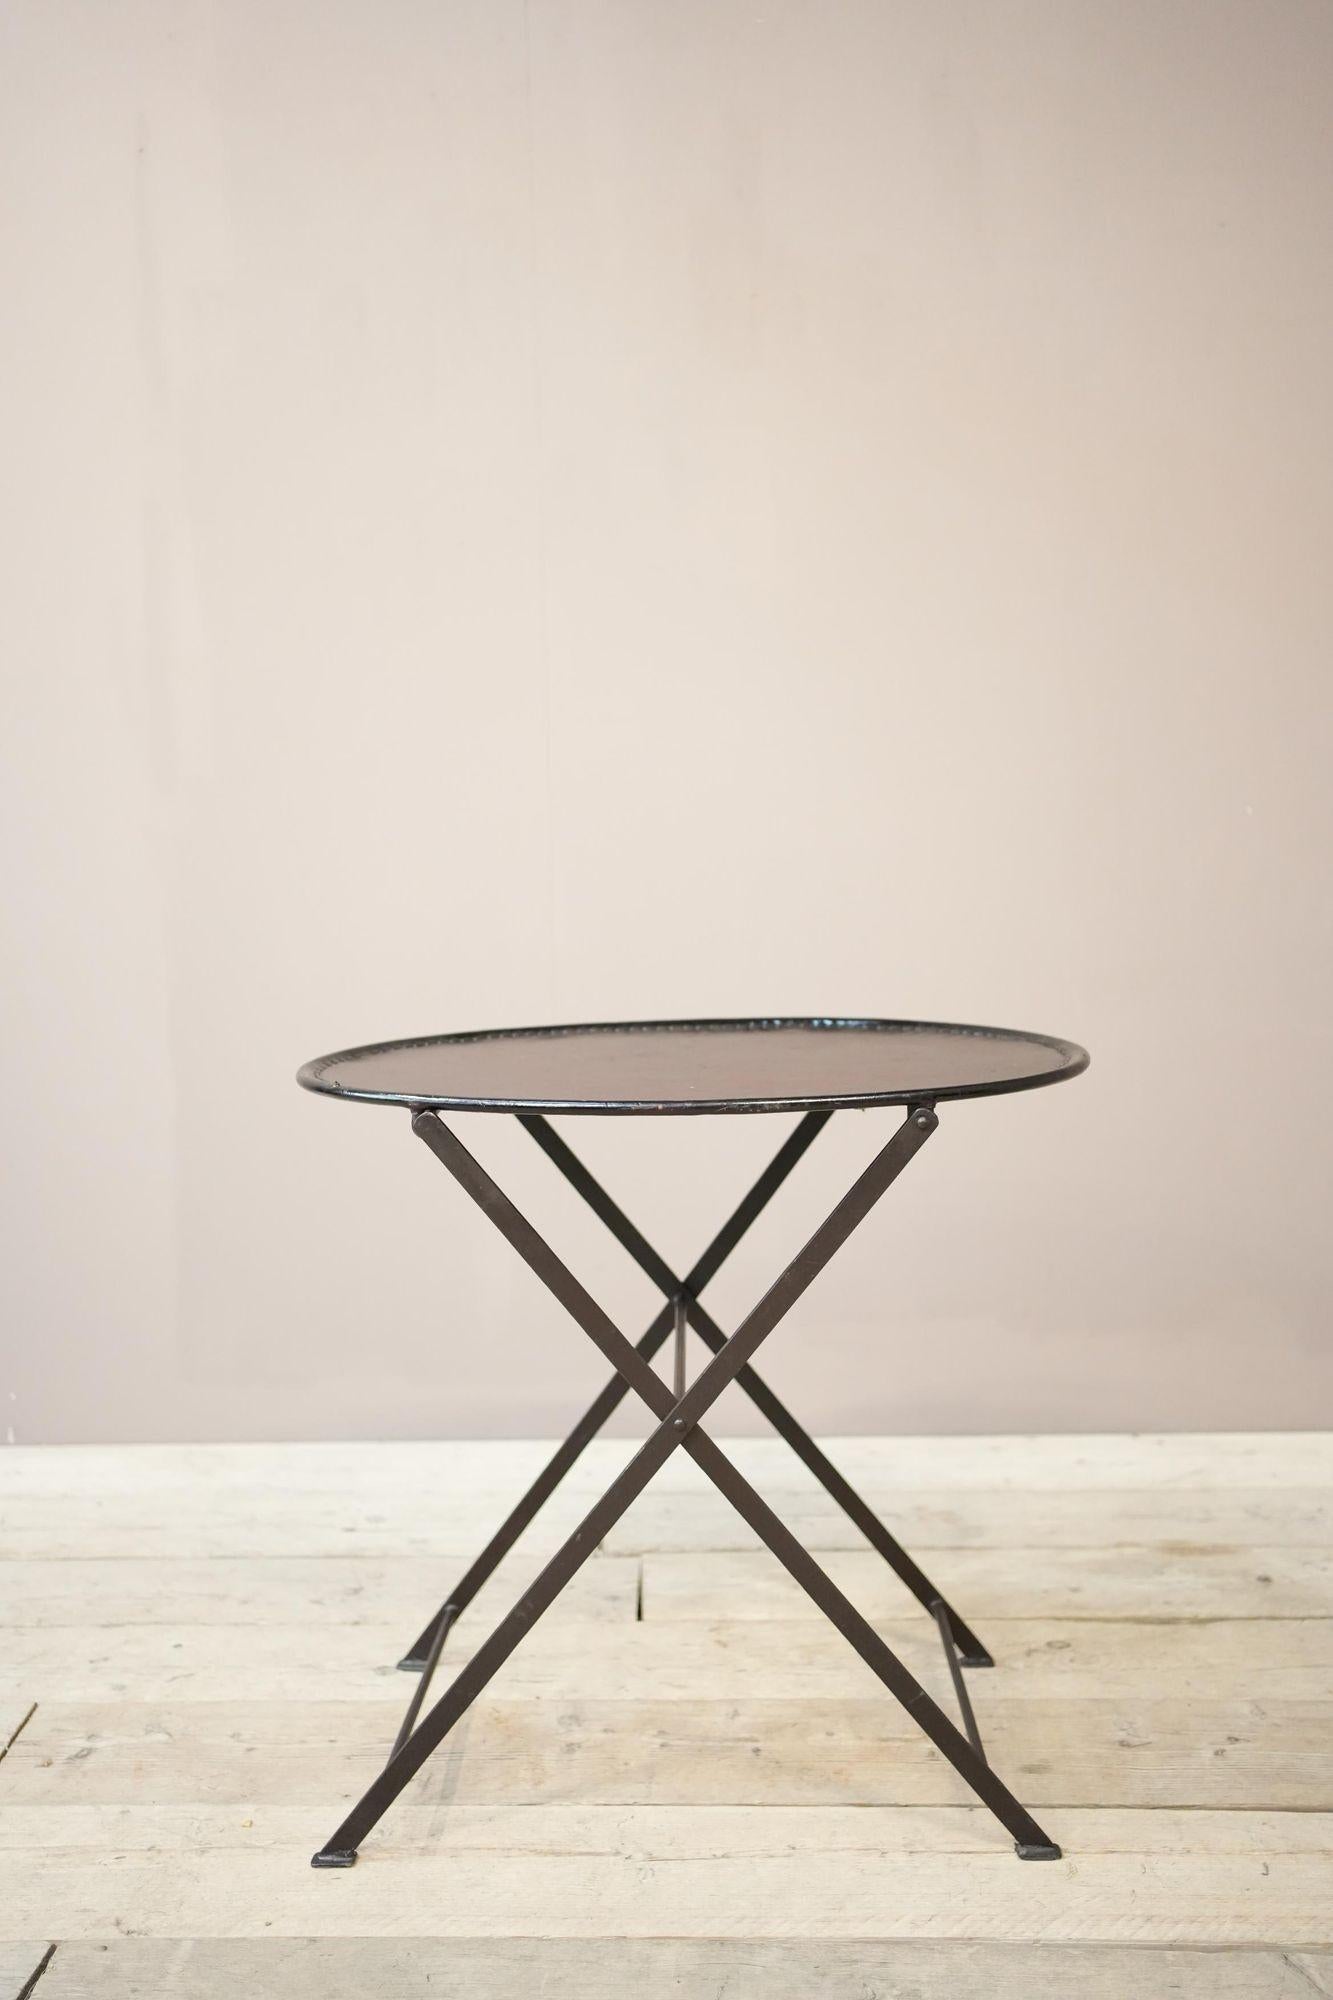 This is a fabulous piece of 20th century design inspired by the 19th century campaign furniture that would pack away for ease of carrying. This is a leather and metal folding drinks table. It is a smart design that will sit well in a huge number of